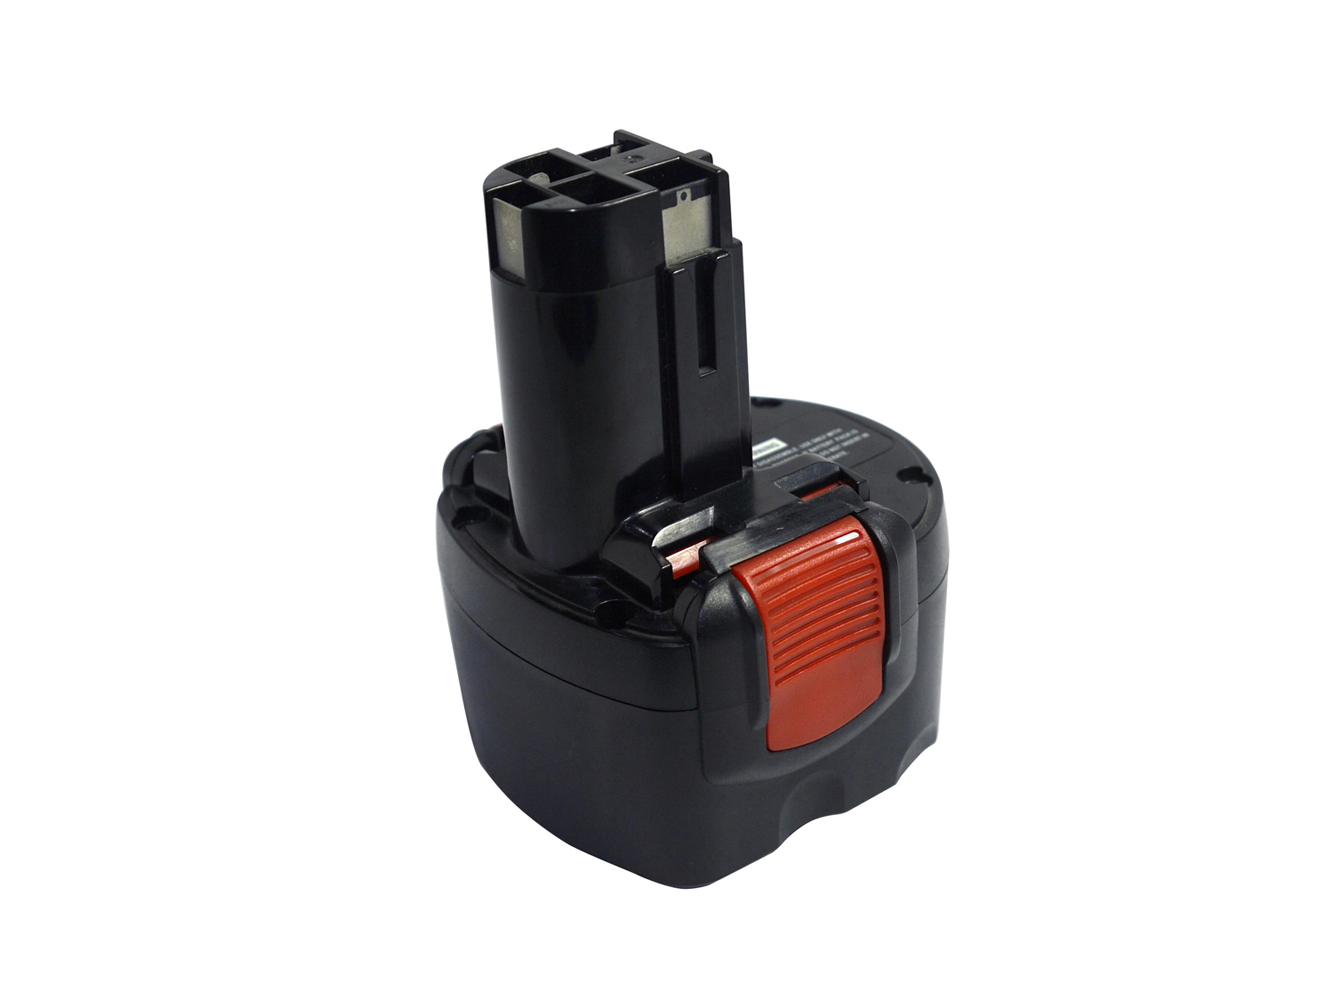 Bosch 12524, 2 607 001 380 Power Tool Battery For 23609, 32609 replacement